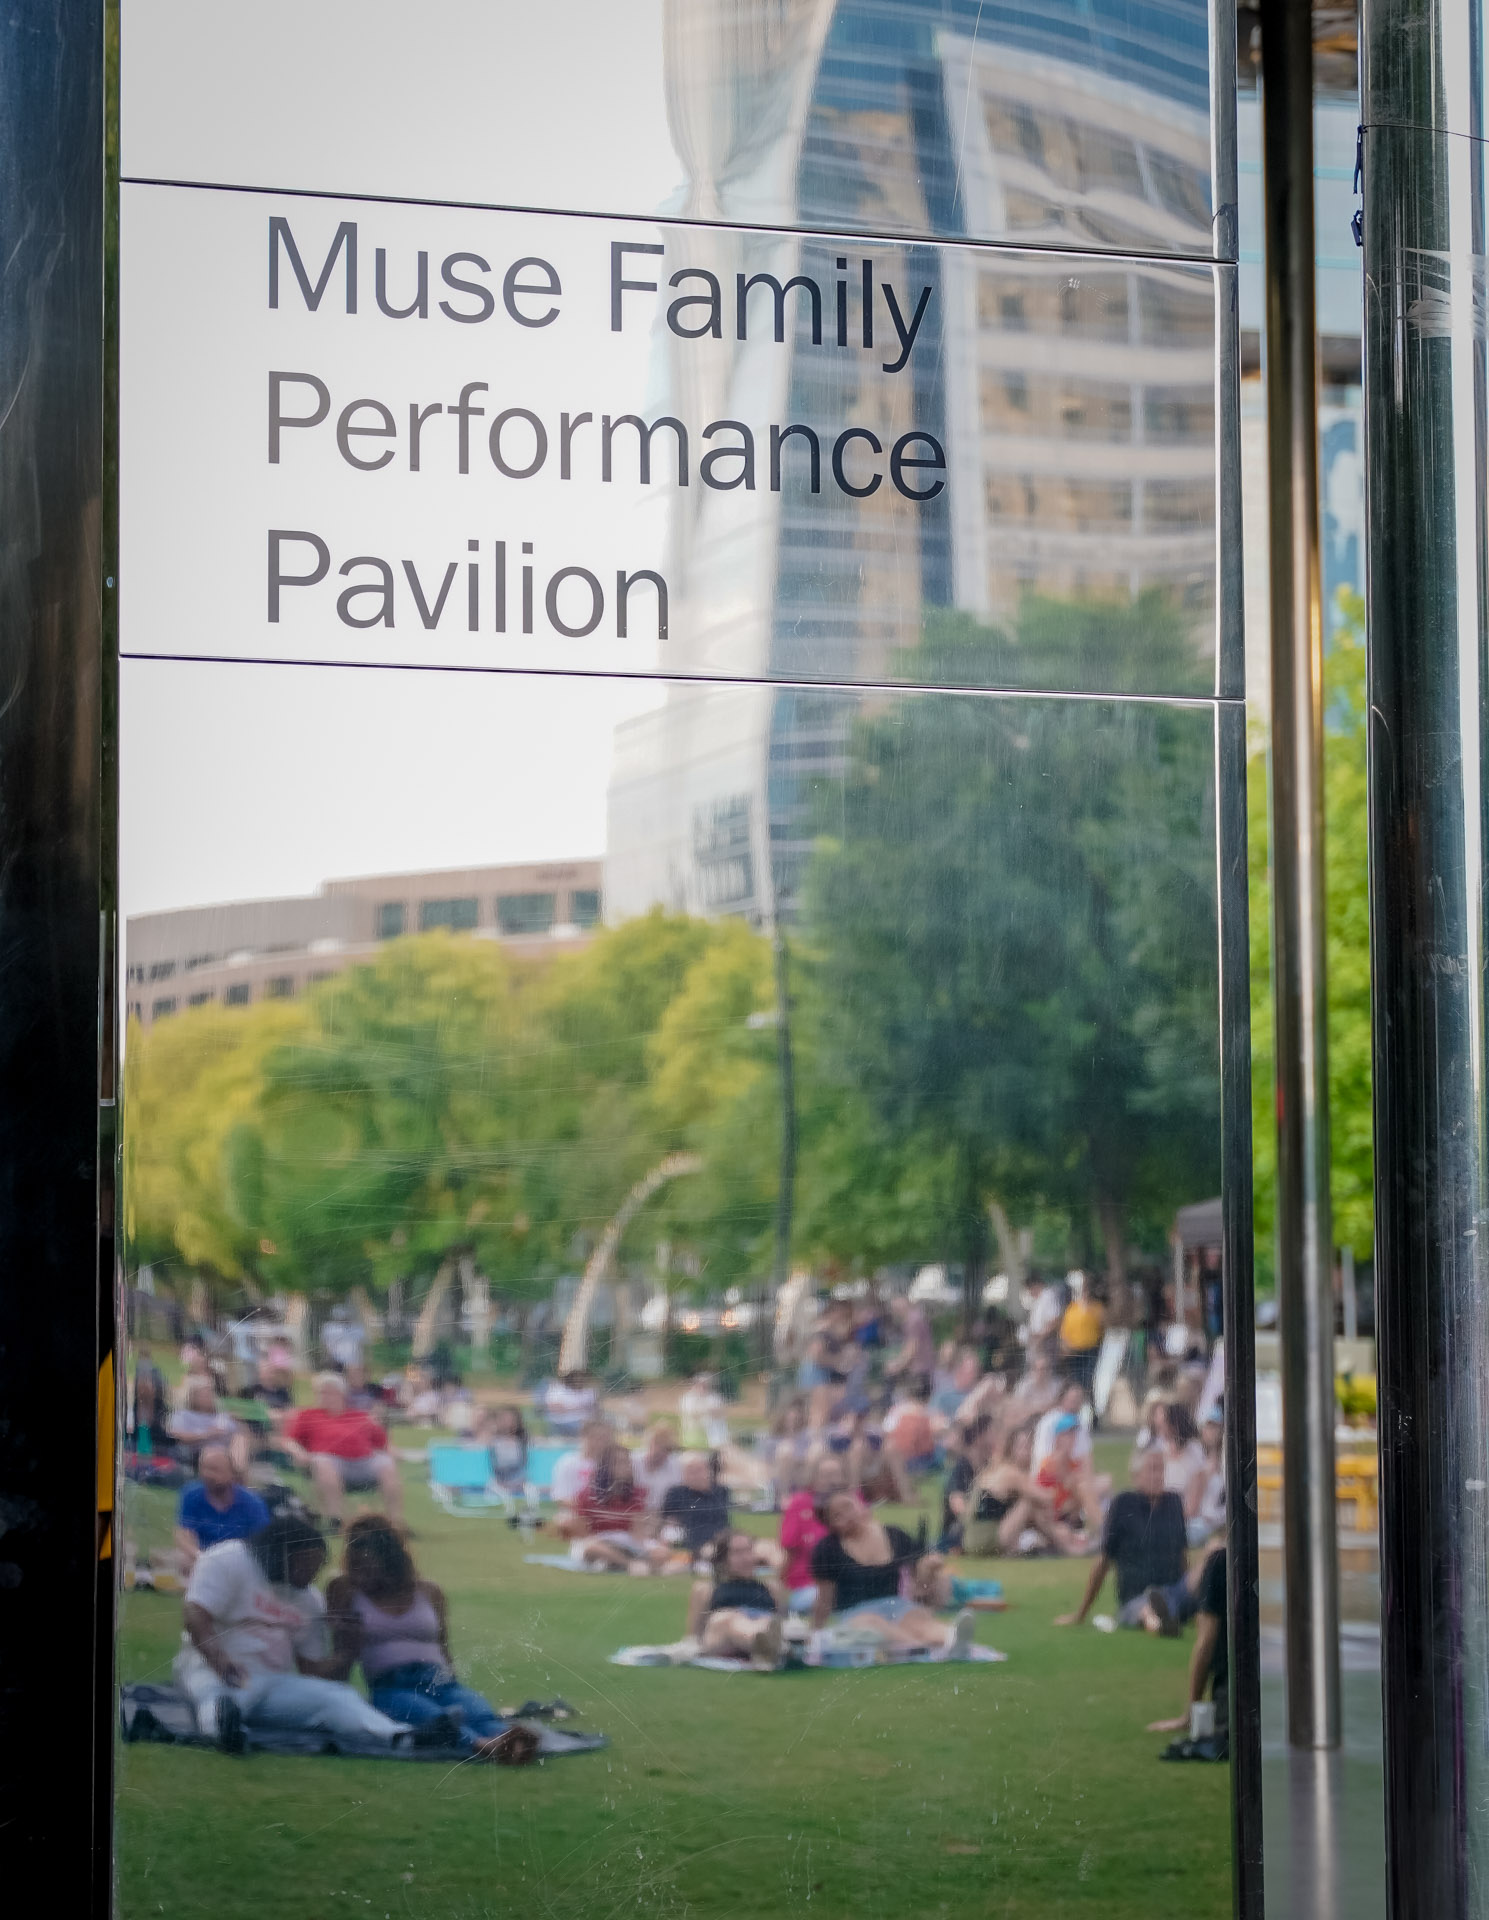 A photo of a mirrored perspective of a crowd sitting on grass